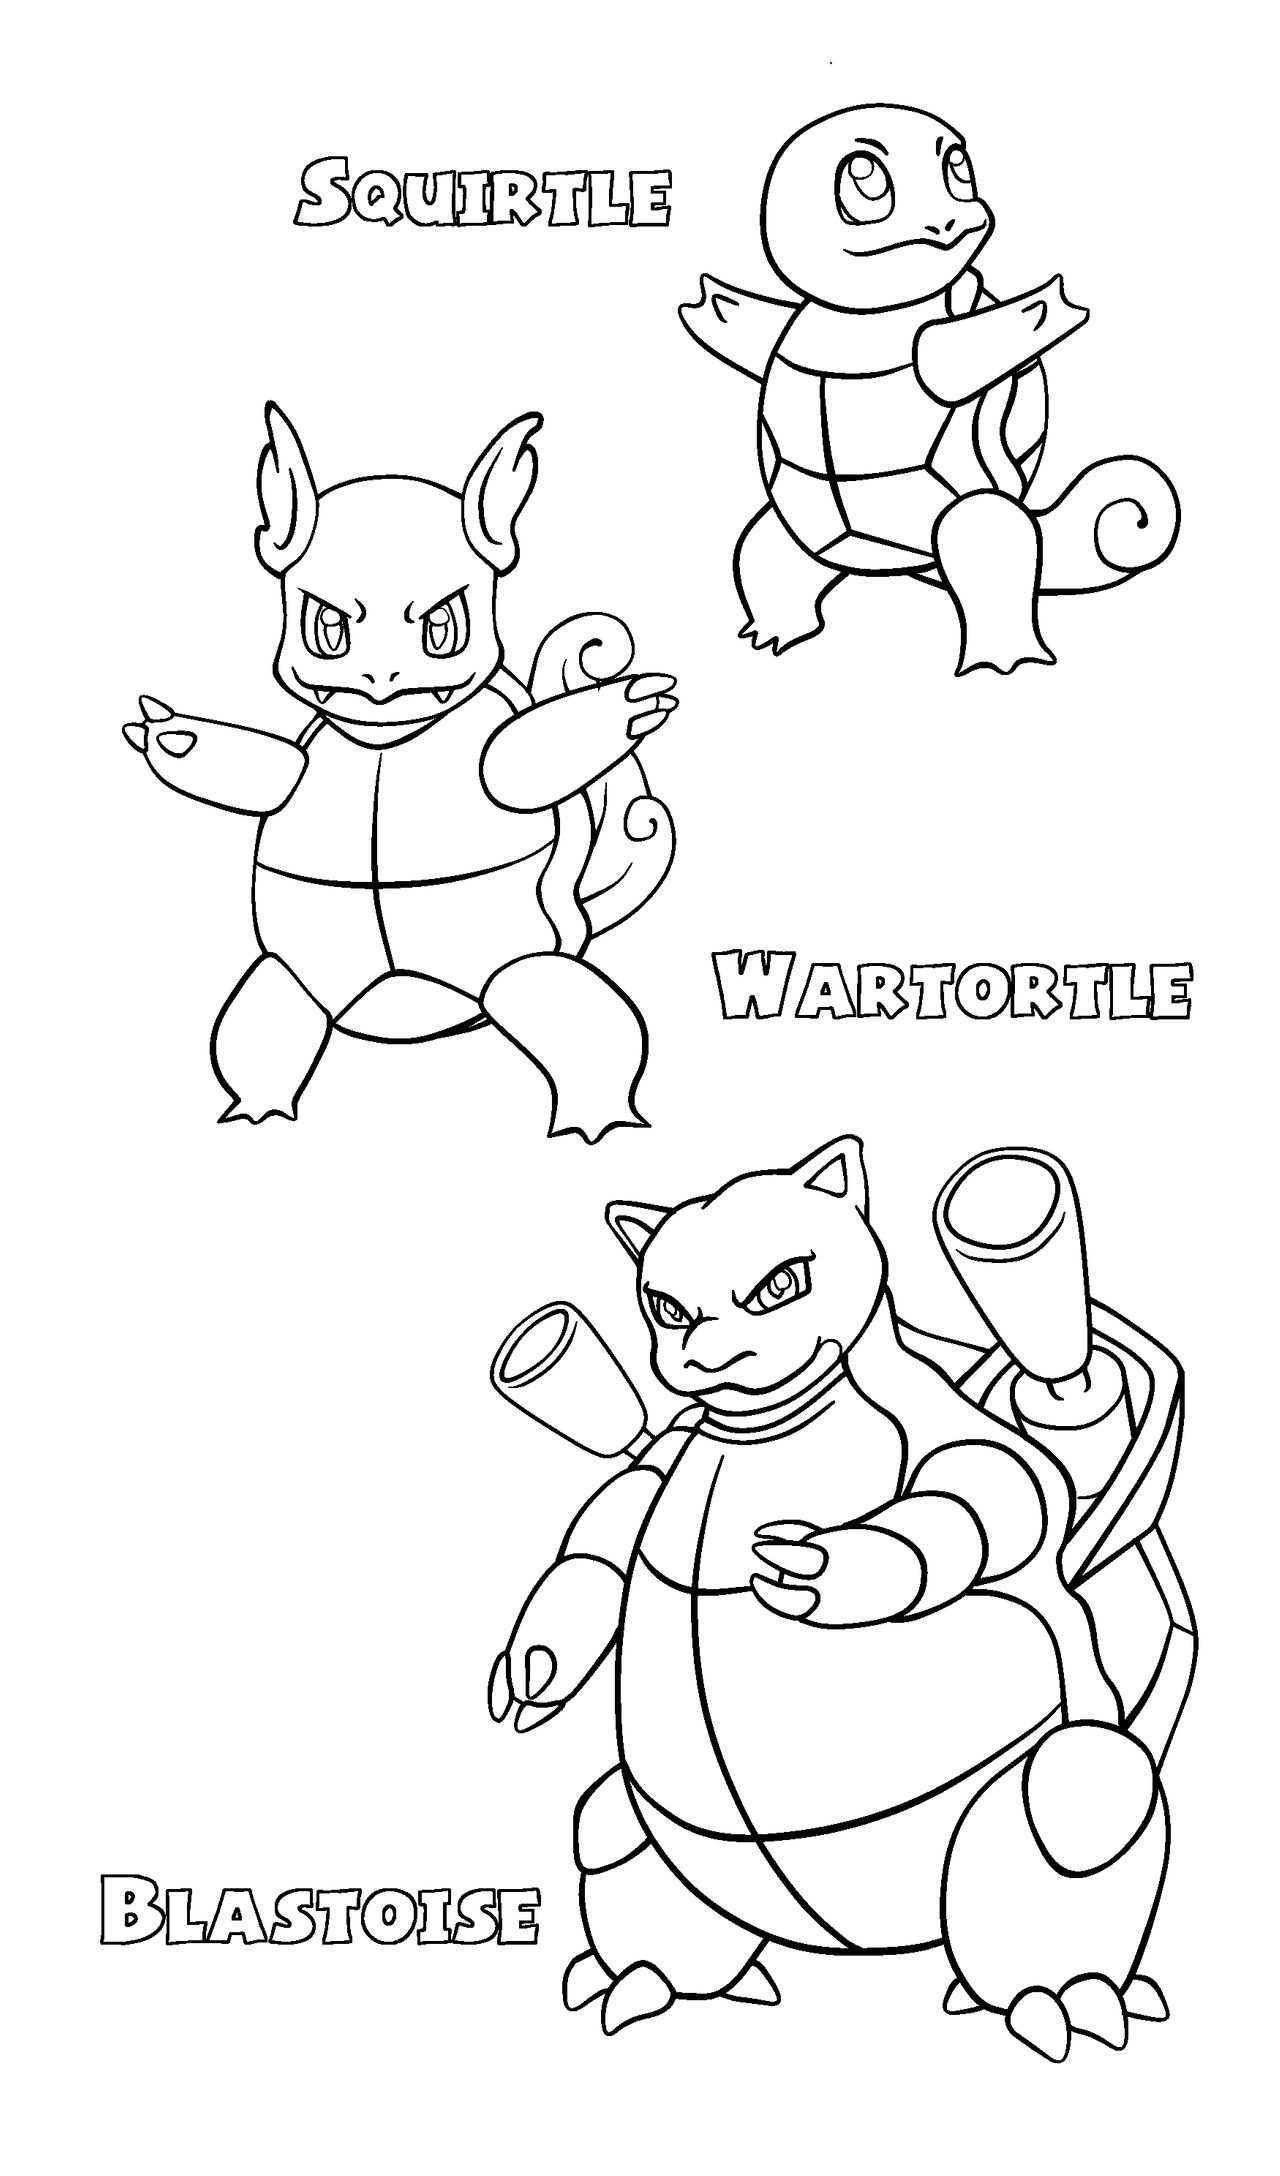 Squirtle Line Coloring Page By Madhuvati On Deviantart Kleurplaten